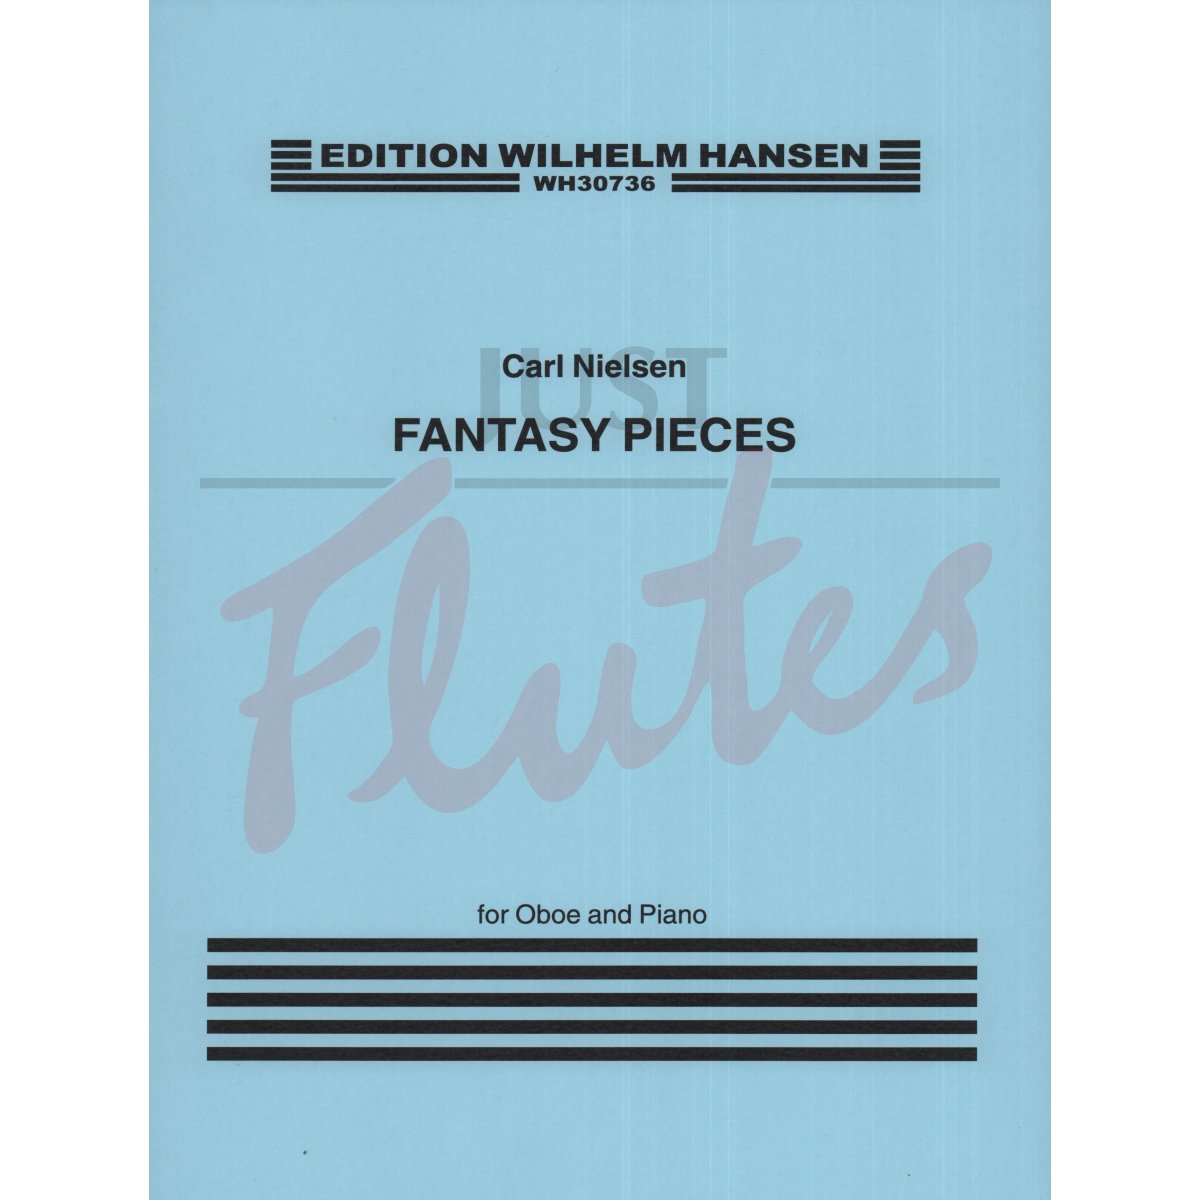 Fantasy Pieces for Oboe and Piano